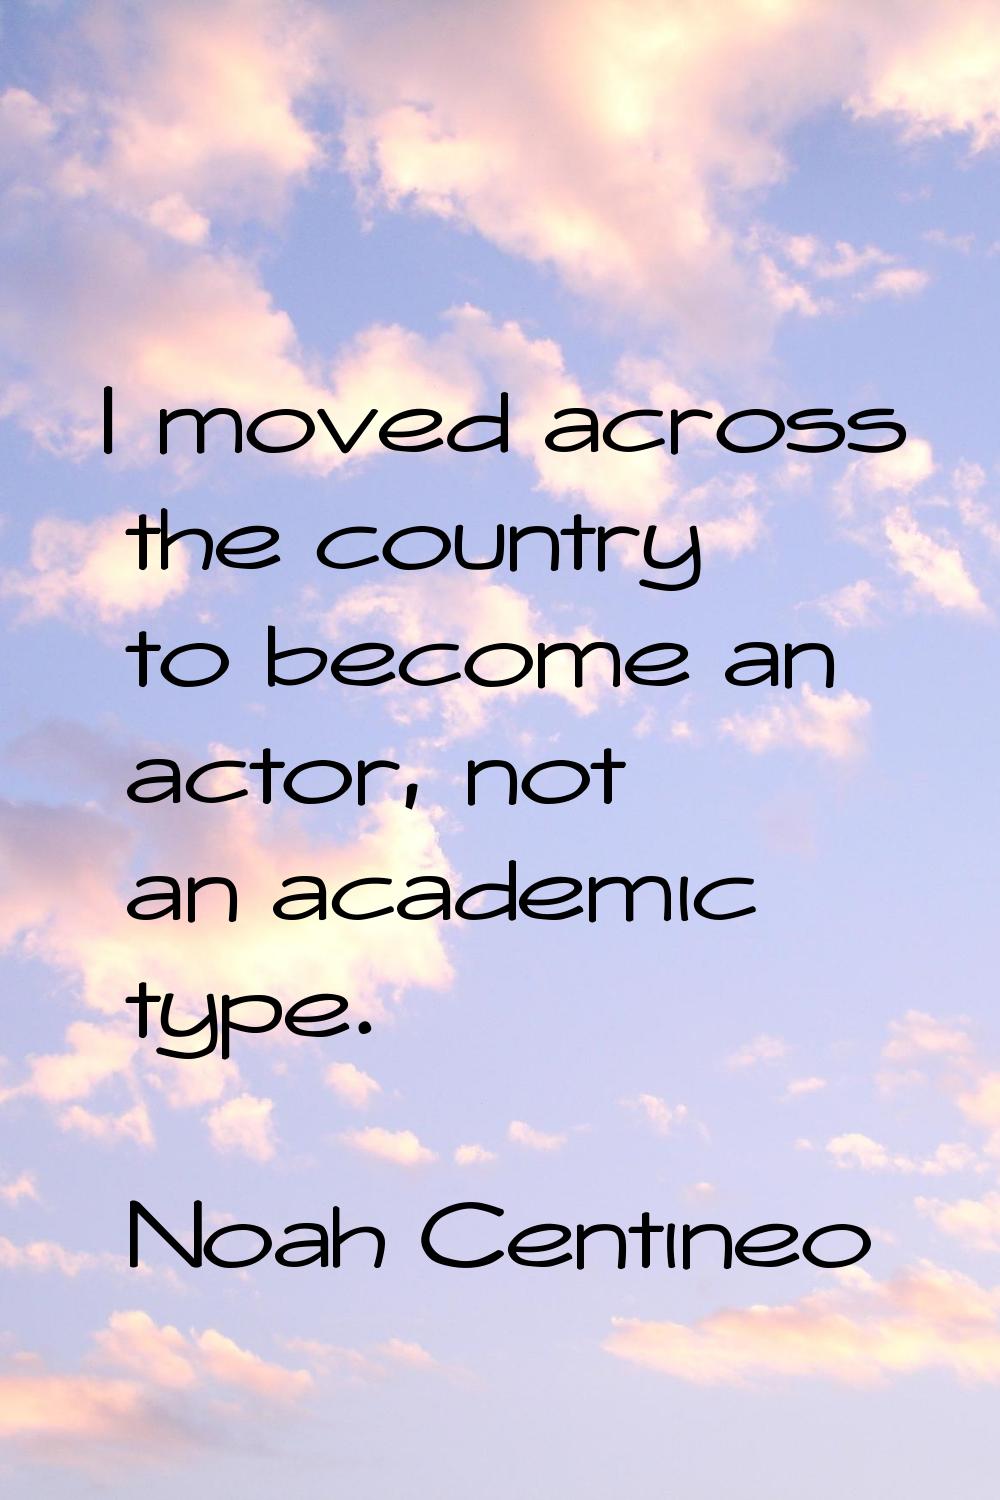 I moved across the country to become an actor, not an academic type.